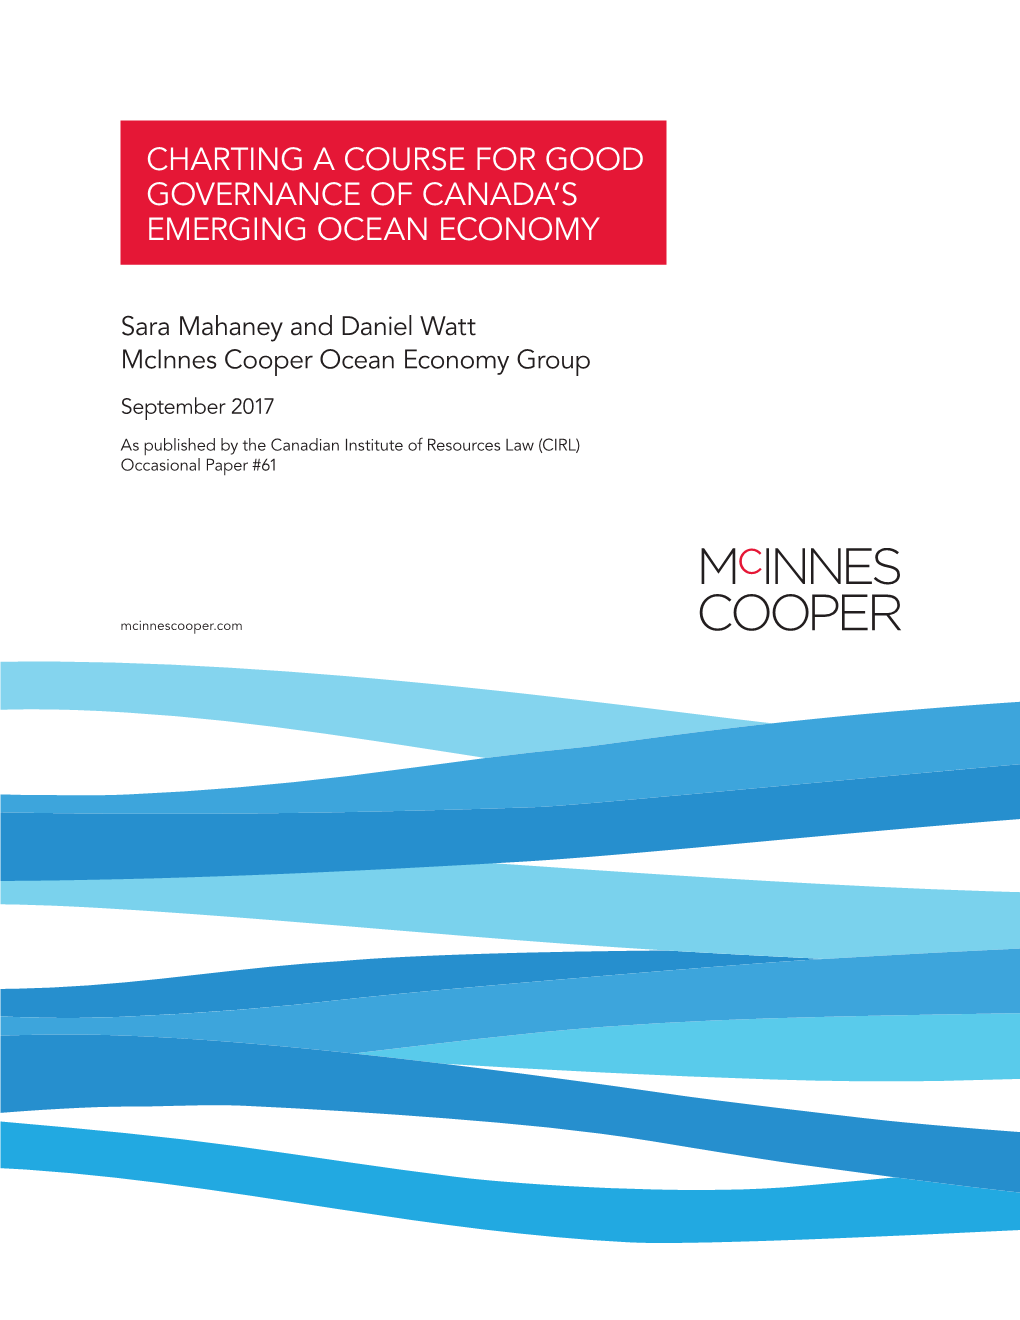 CHARTING a COURSE for GOOD GOVERNANCE of CANADA's EMERGING OCEAN ECONOMY Mcinnes Cooper